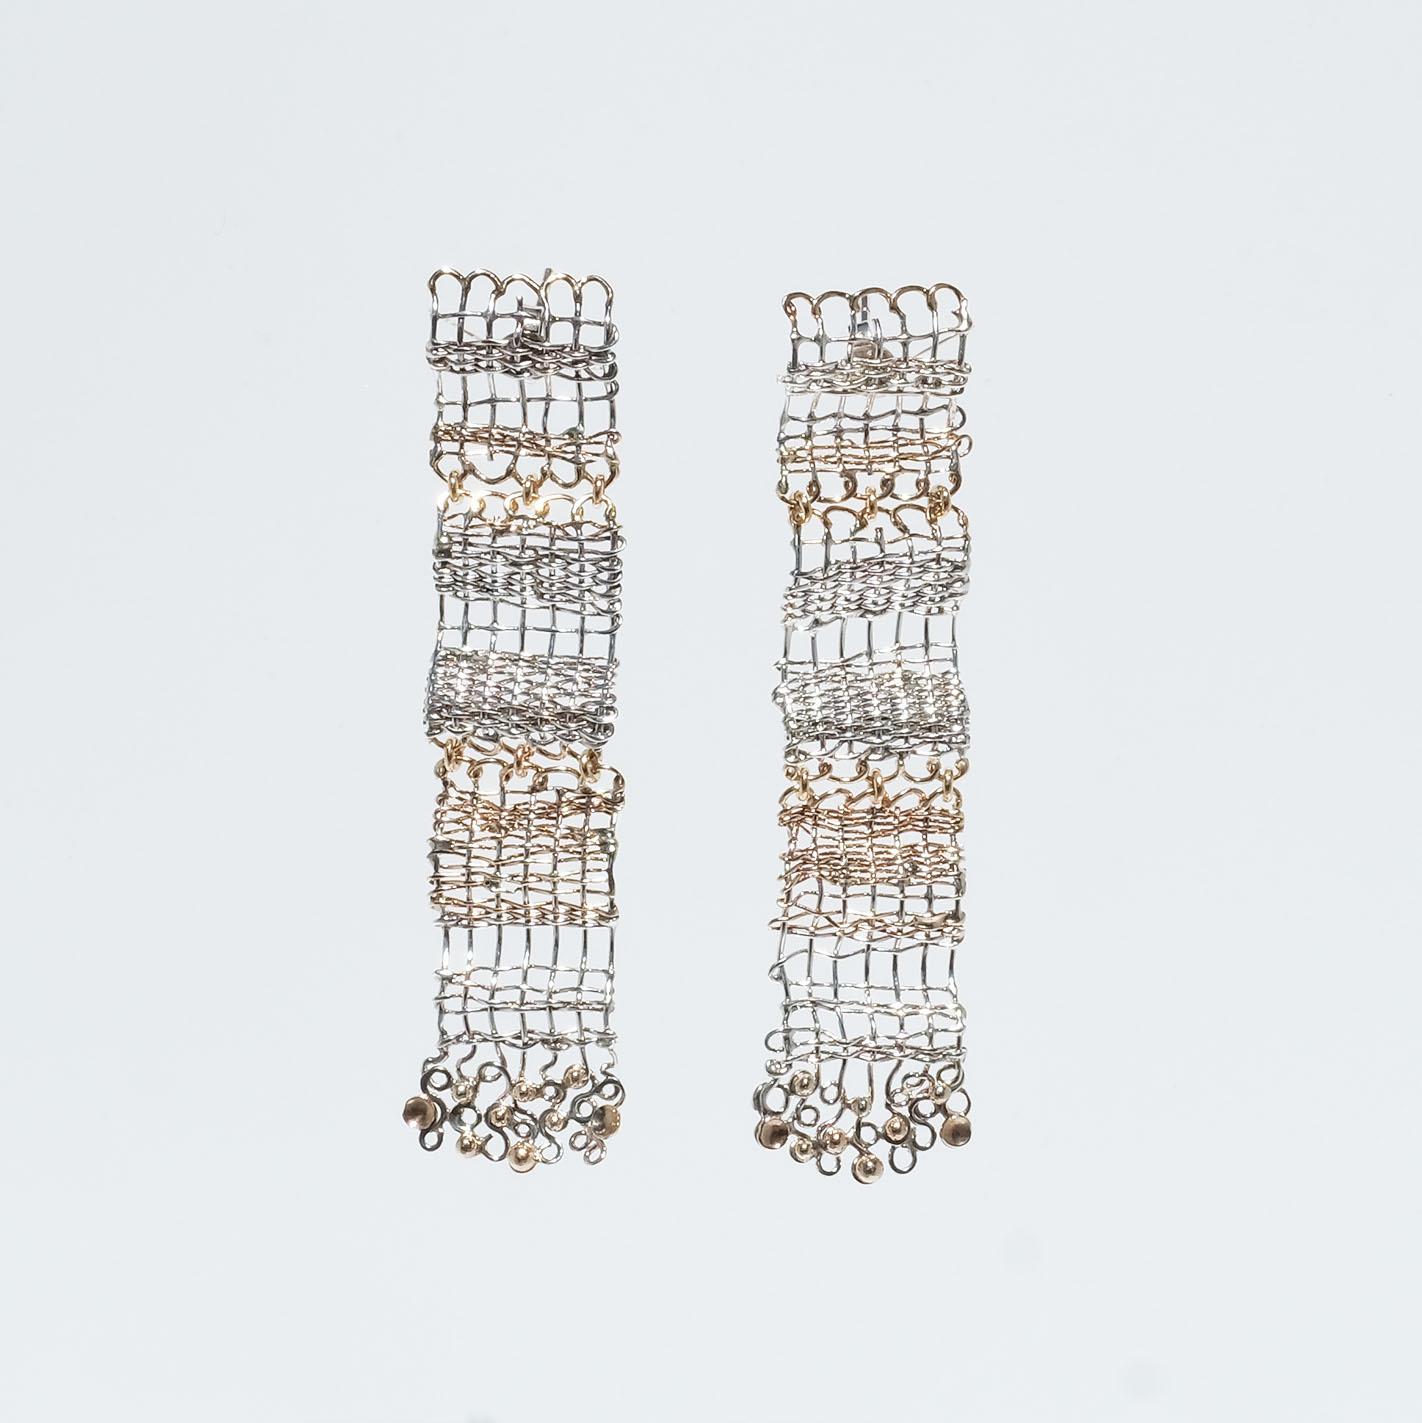 These chandelier earrings are made of sterling silver and 18 karat gold threads that have been intertwined into beautiful dangling ornaments. On the lower part of the earrings, the threads have the shape of something that resembles the eight-shaped